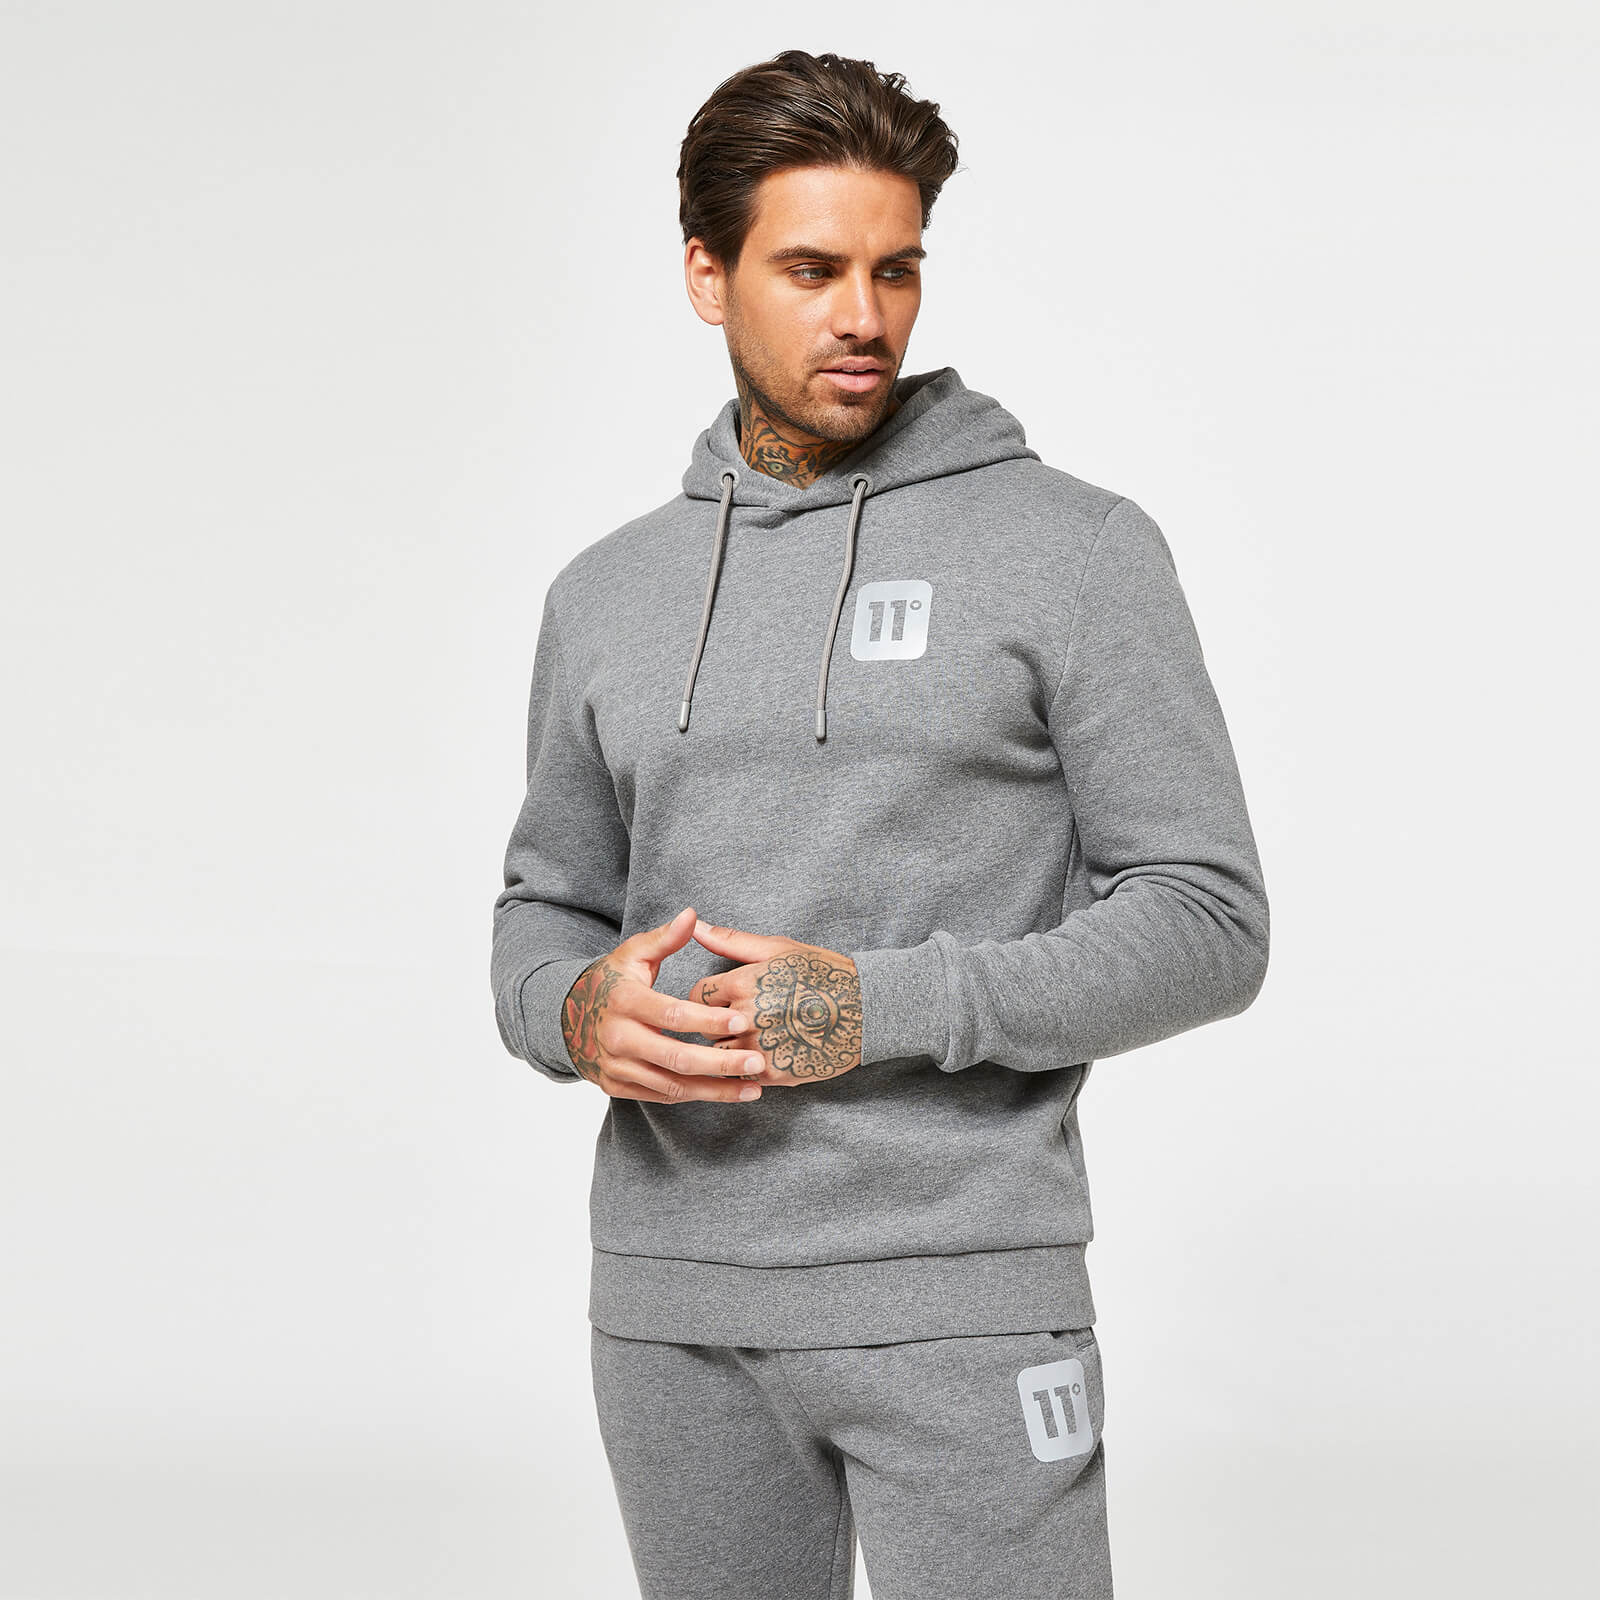 11 Degrees Men%27s Reflective Logo Pullover Hoodie - Charcoal Marl/Reflective - S